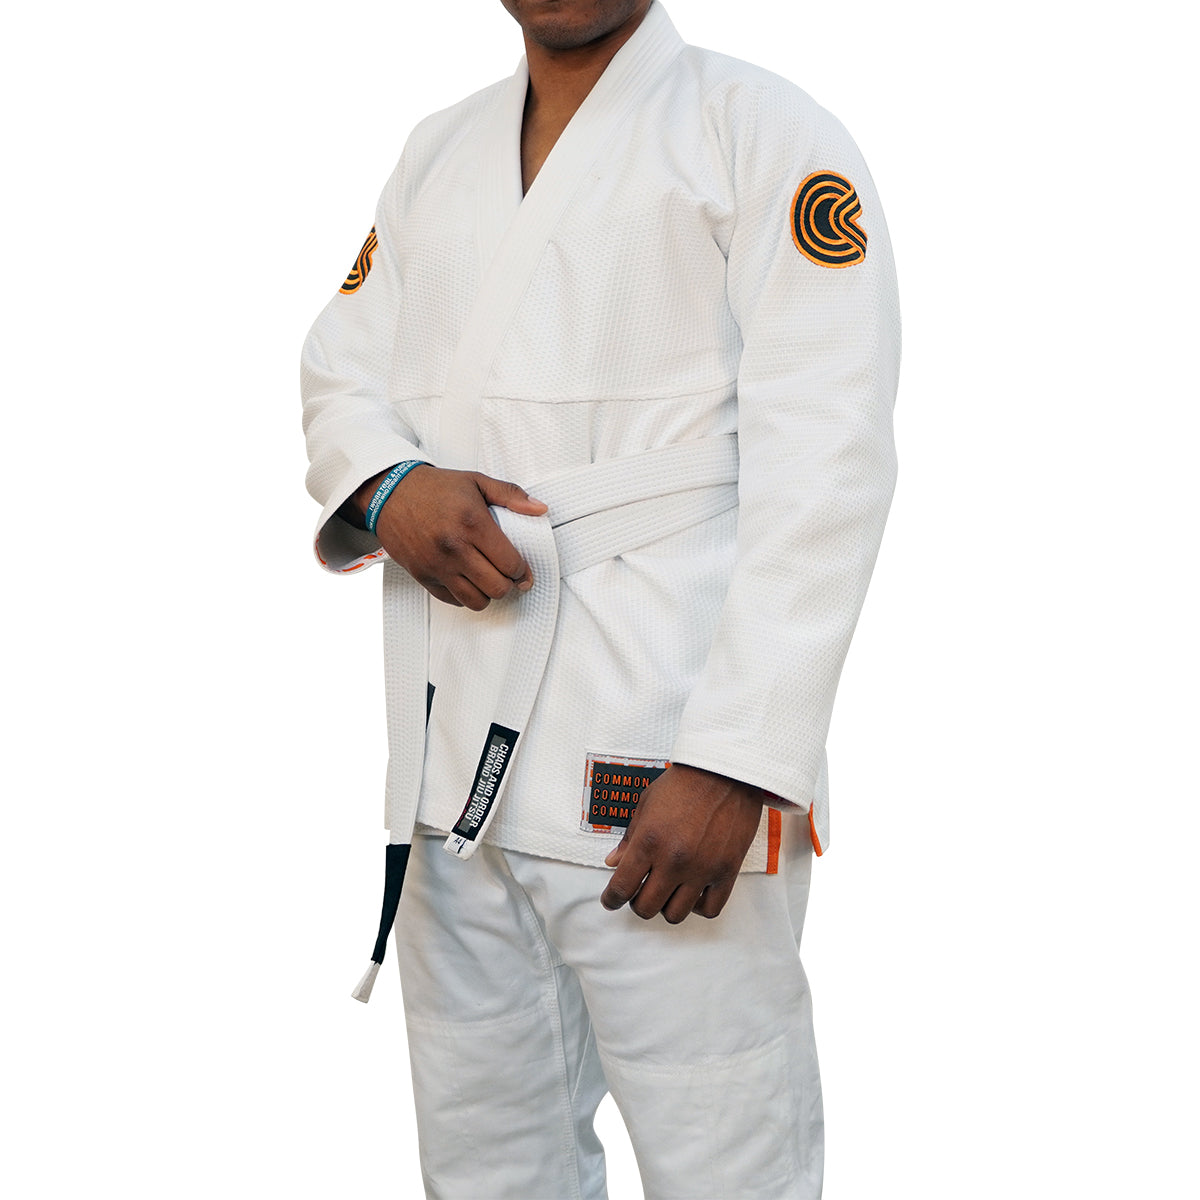 Chaos and Order Base Label V2 BJJ Gi - White Chaos and Order